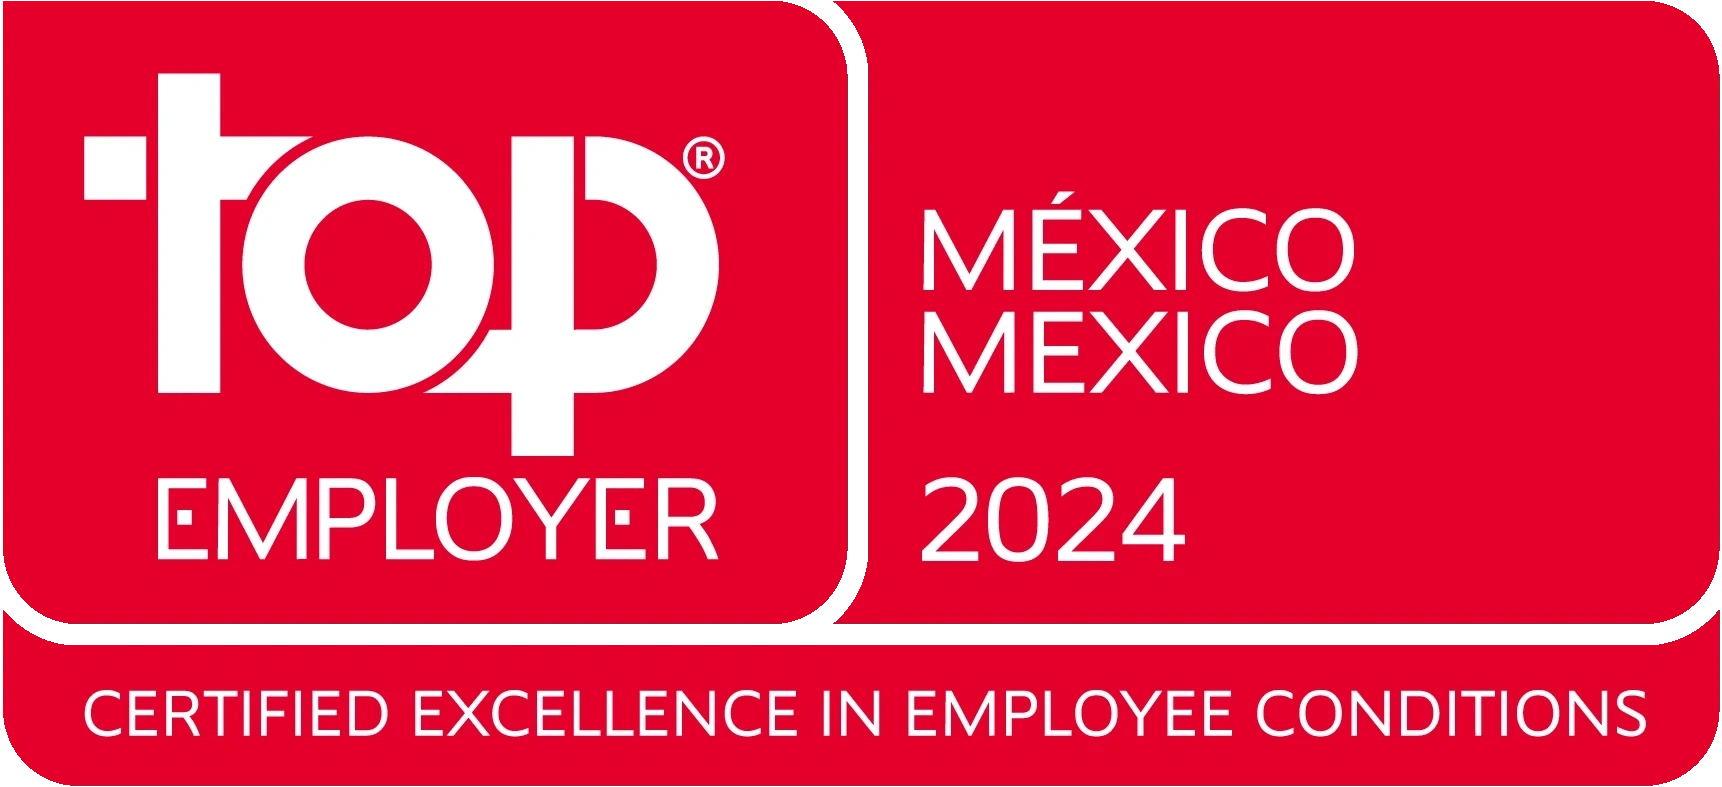 Global Top Employer in Mexico